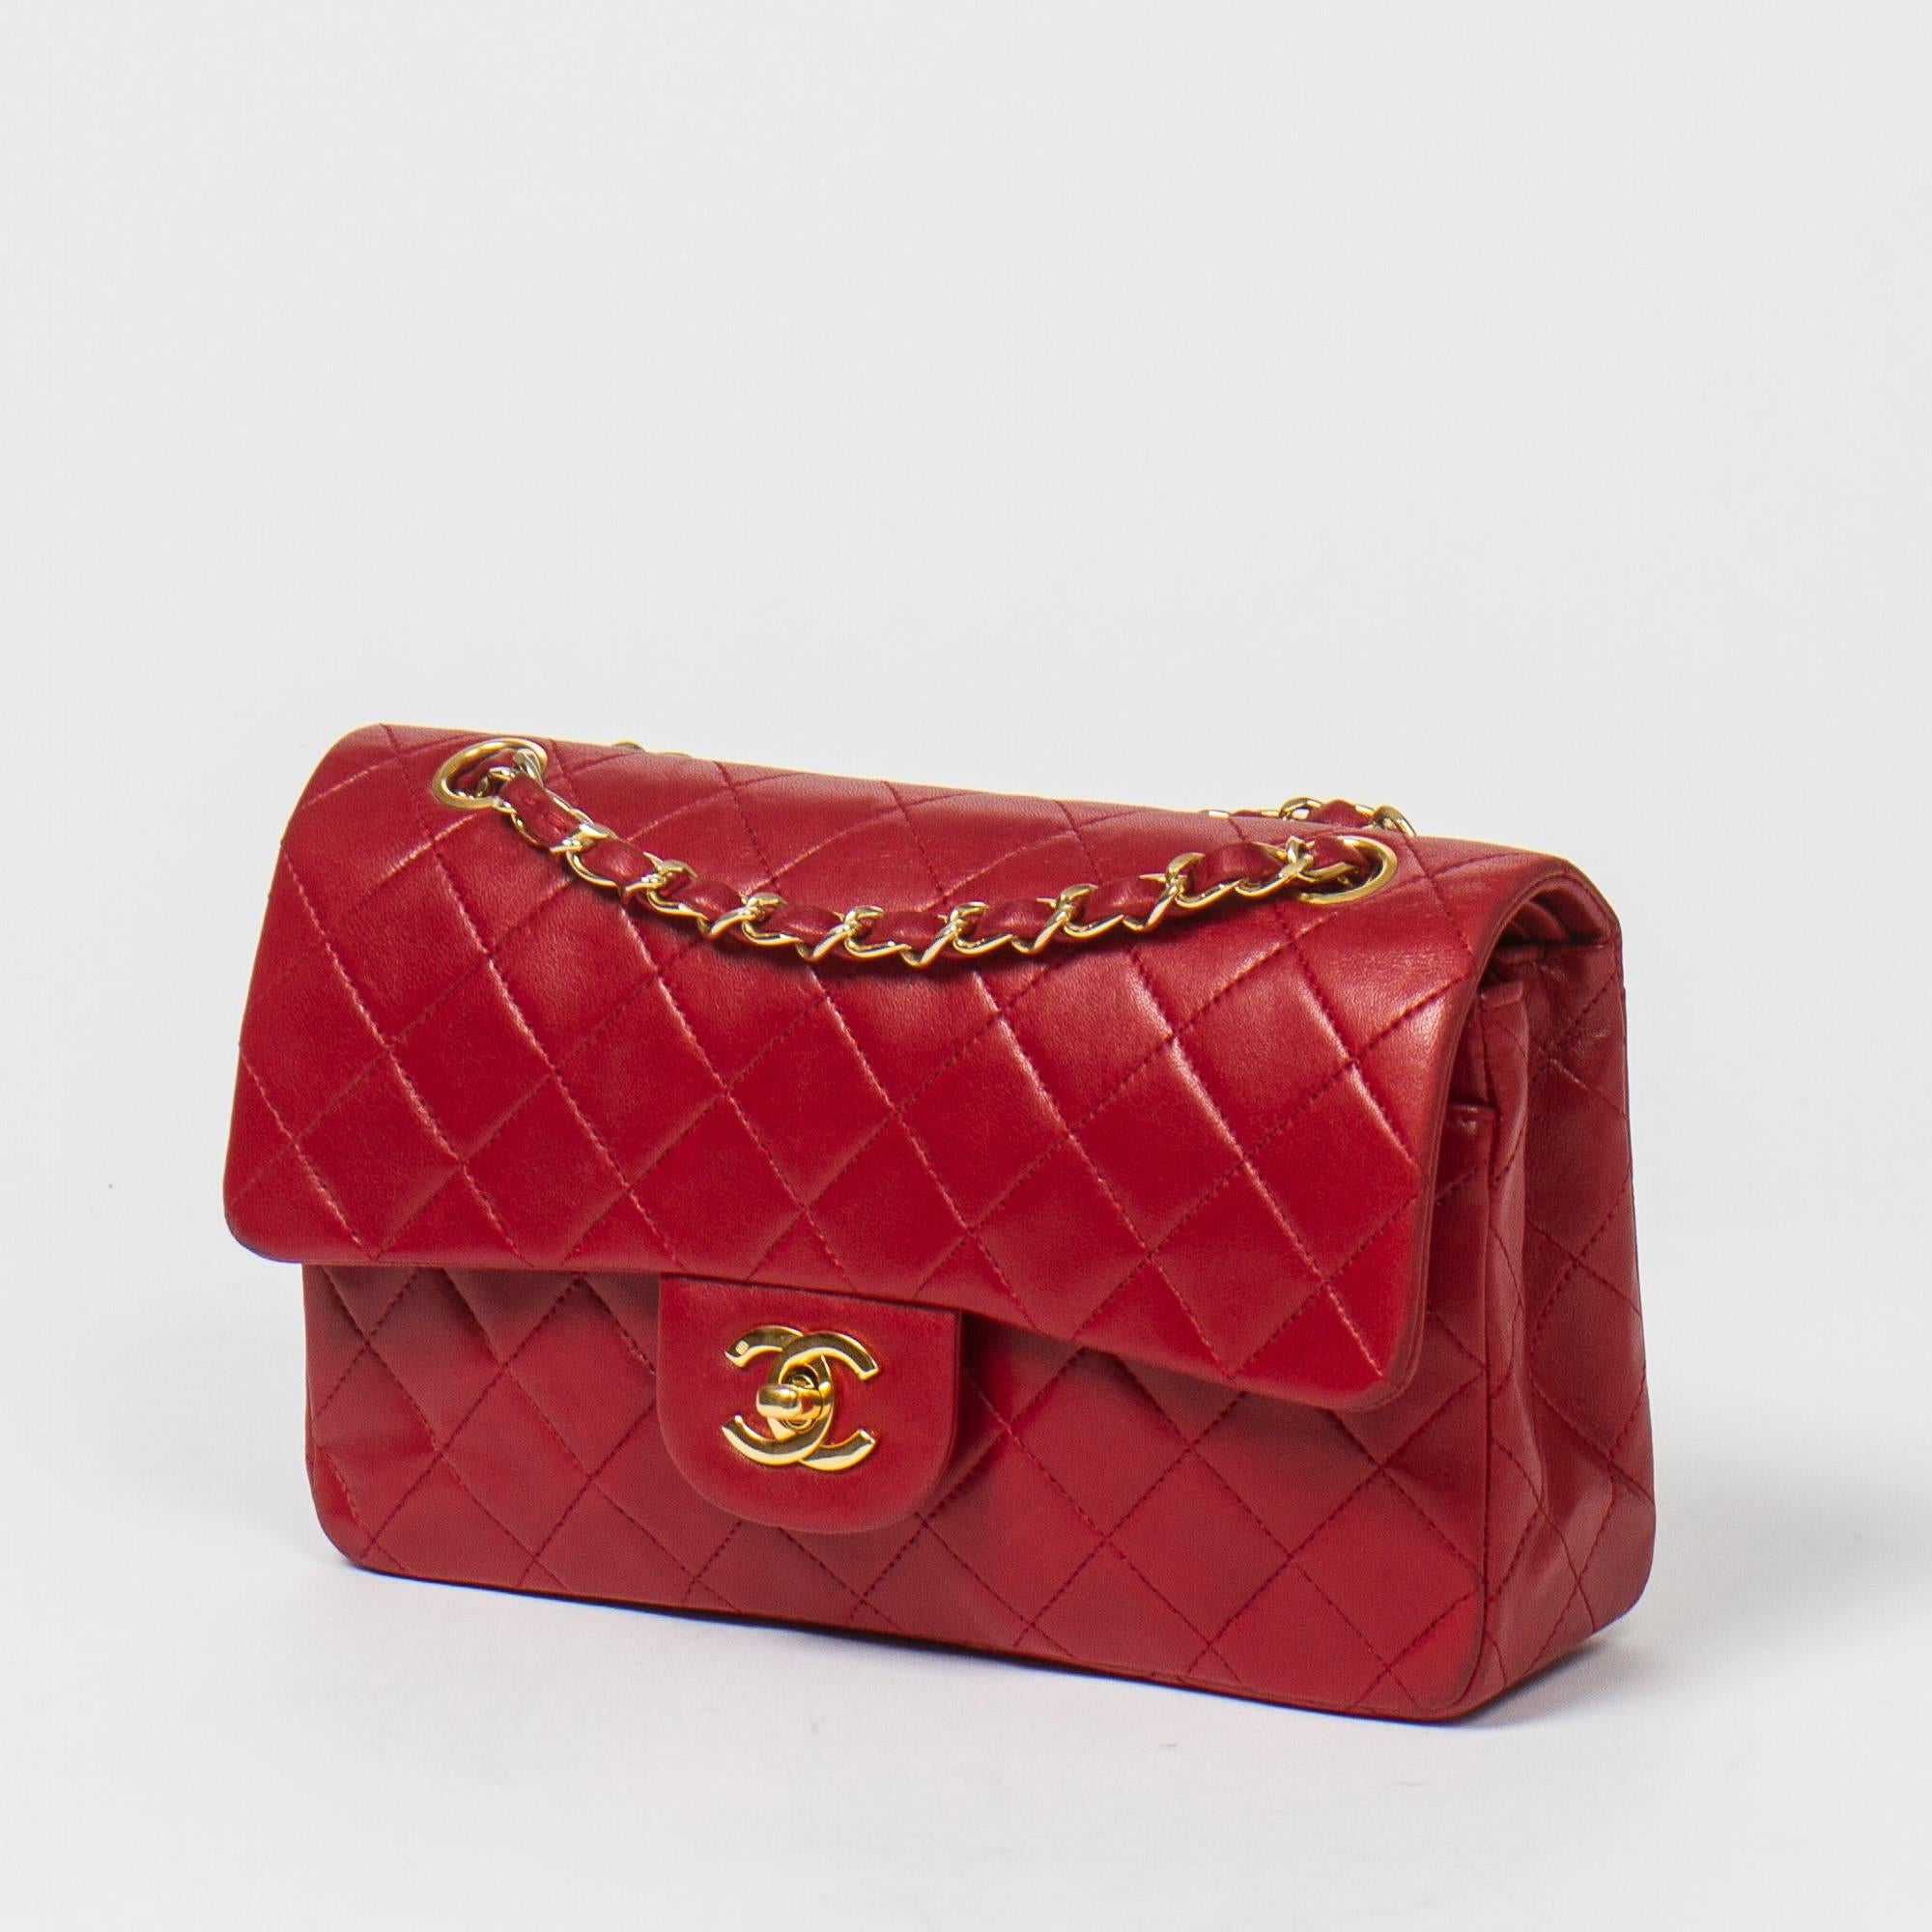 Classic Double Flap 23cm in red quilted lambskin with double chain strap interlaced with leather, signature turnlock, gold tone hardware. Back slip pocket. Red leather lined interior with 3 slip pockets. Gold tone heat stamps 